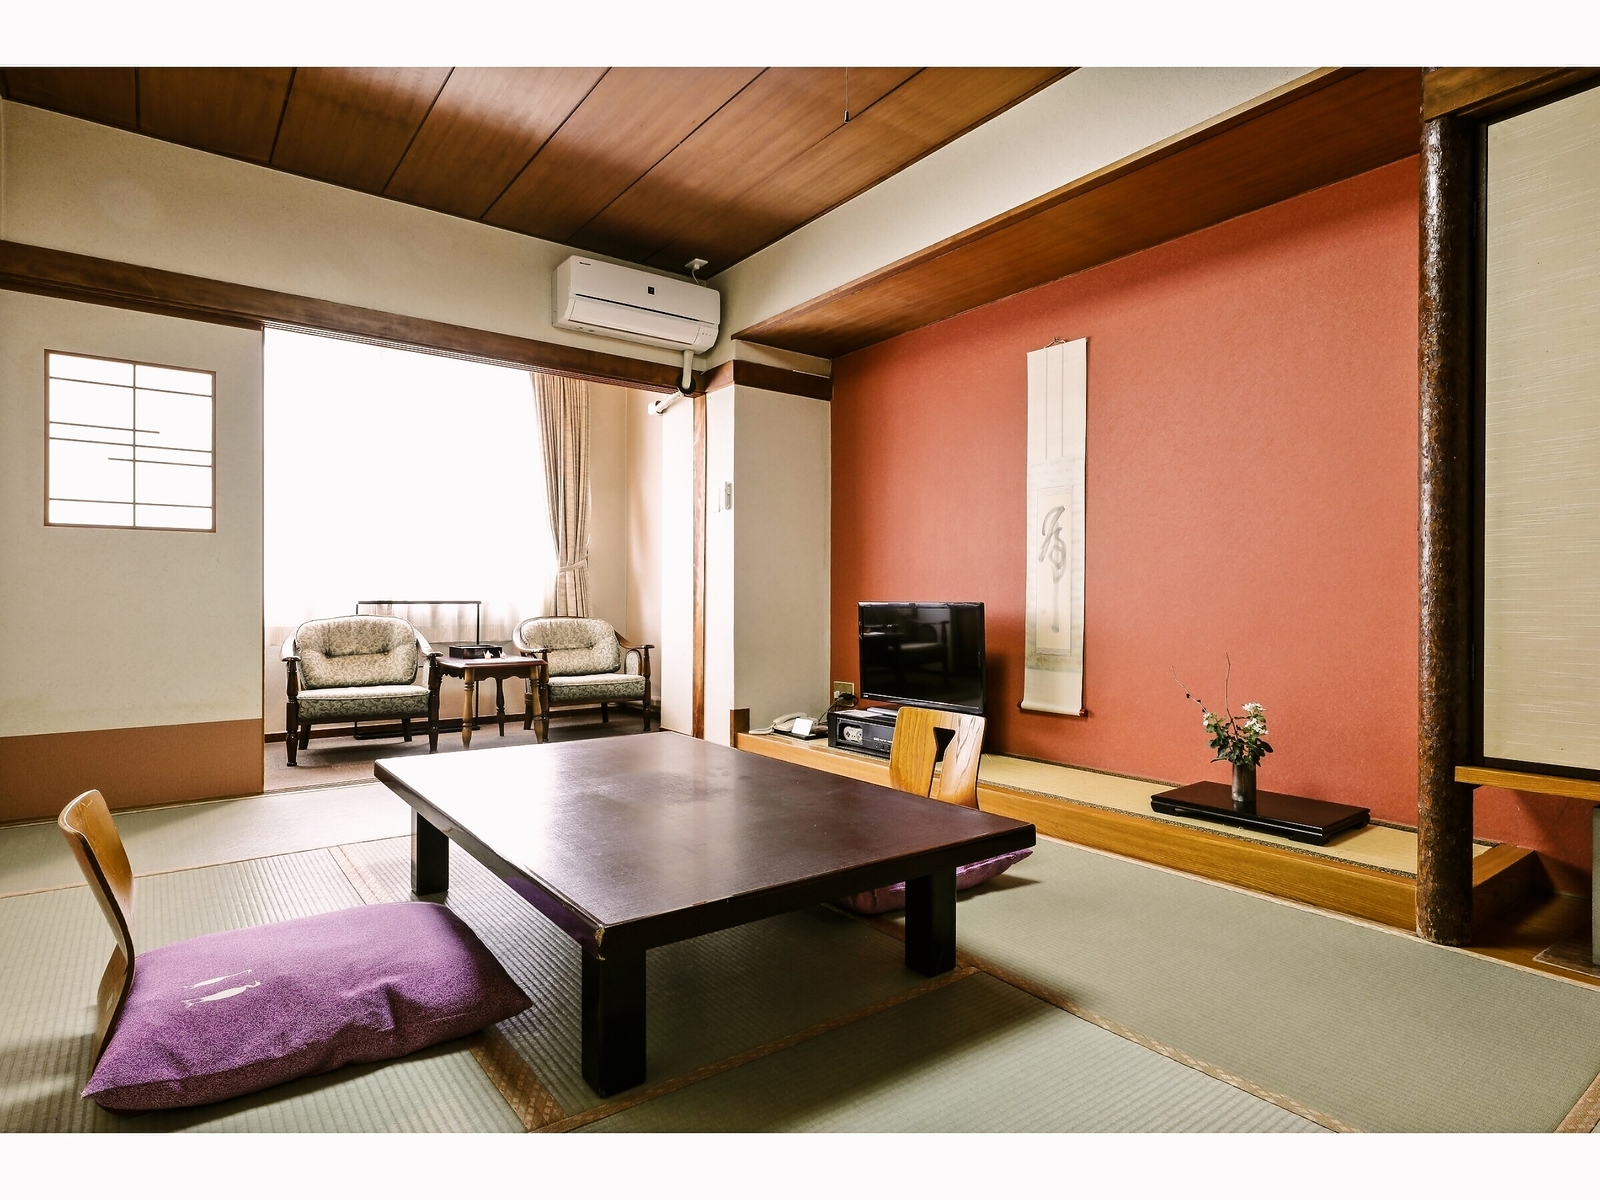 Example of a 7.5 tatami Japanese-style room type